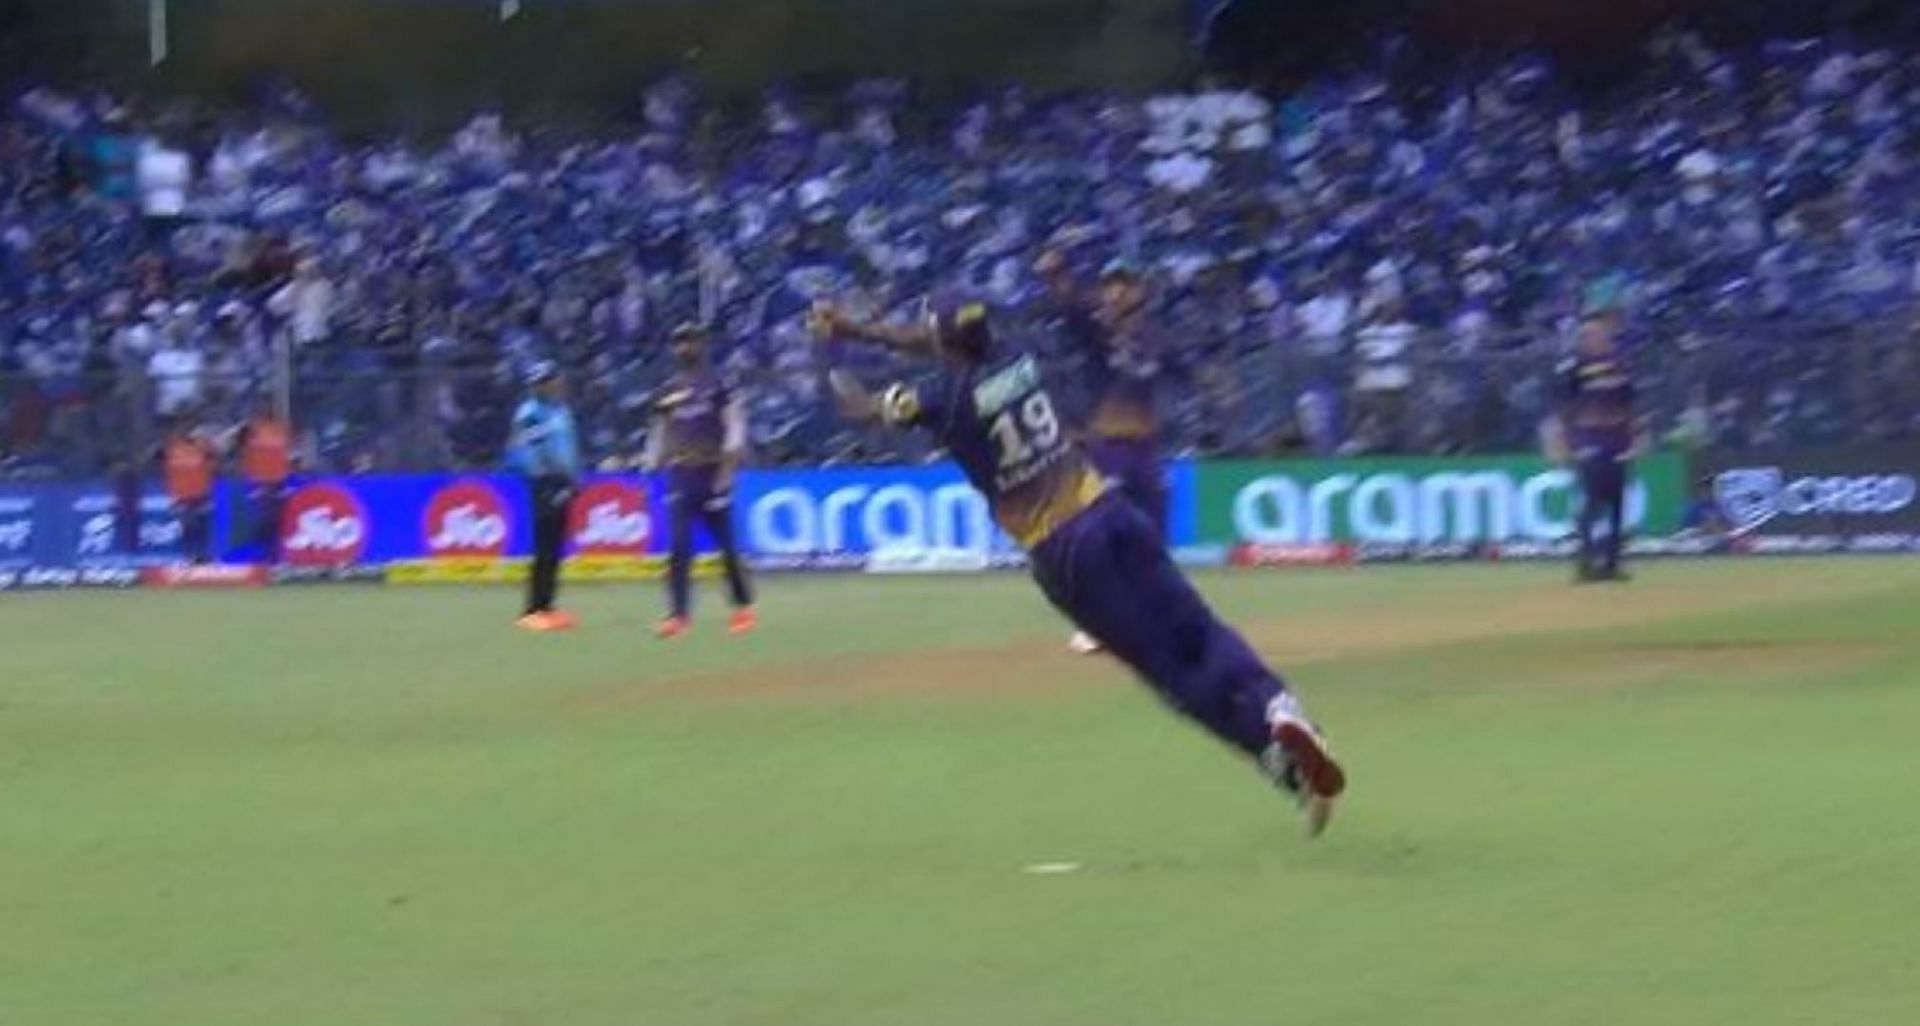 Umesh Yadav pulled off a spectacular catch to dismiss the dangerous Rohit Sharma